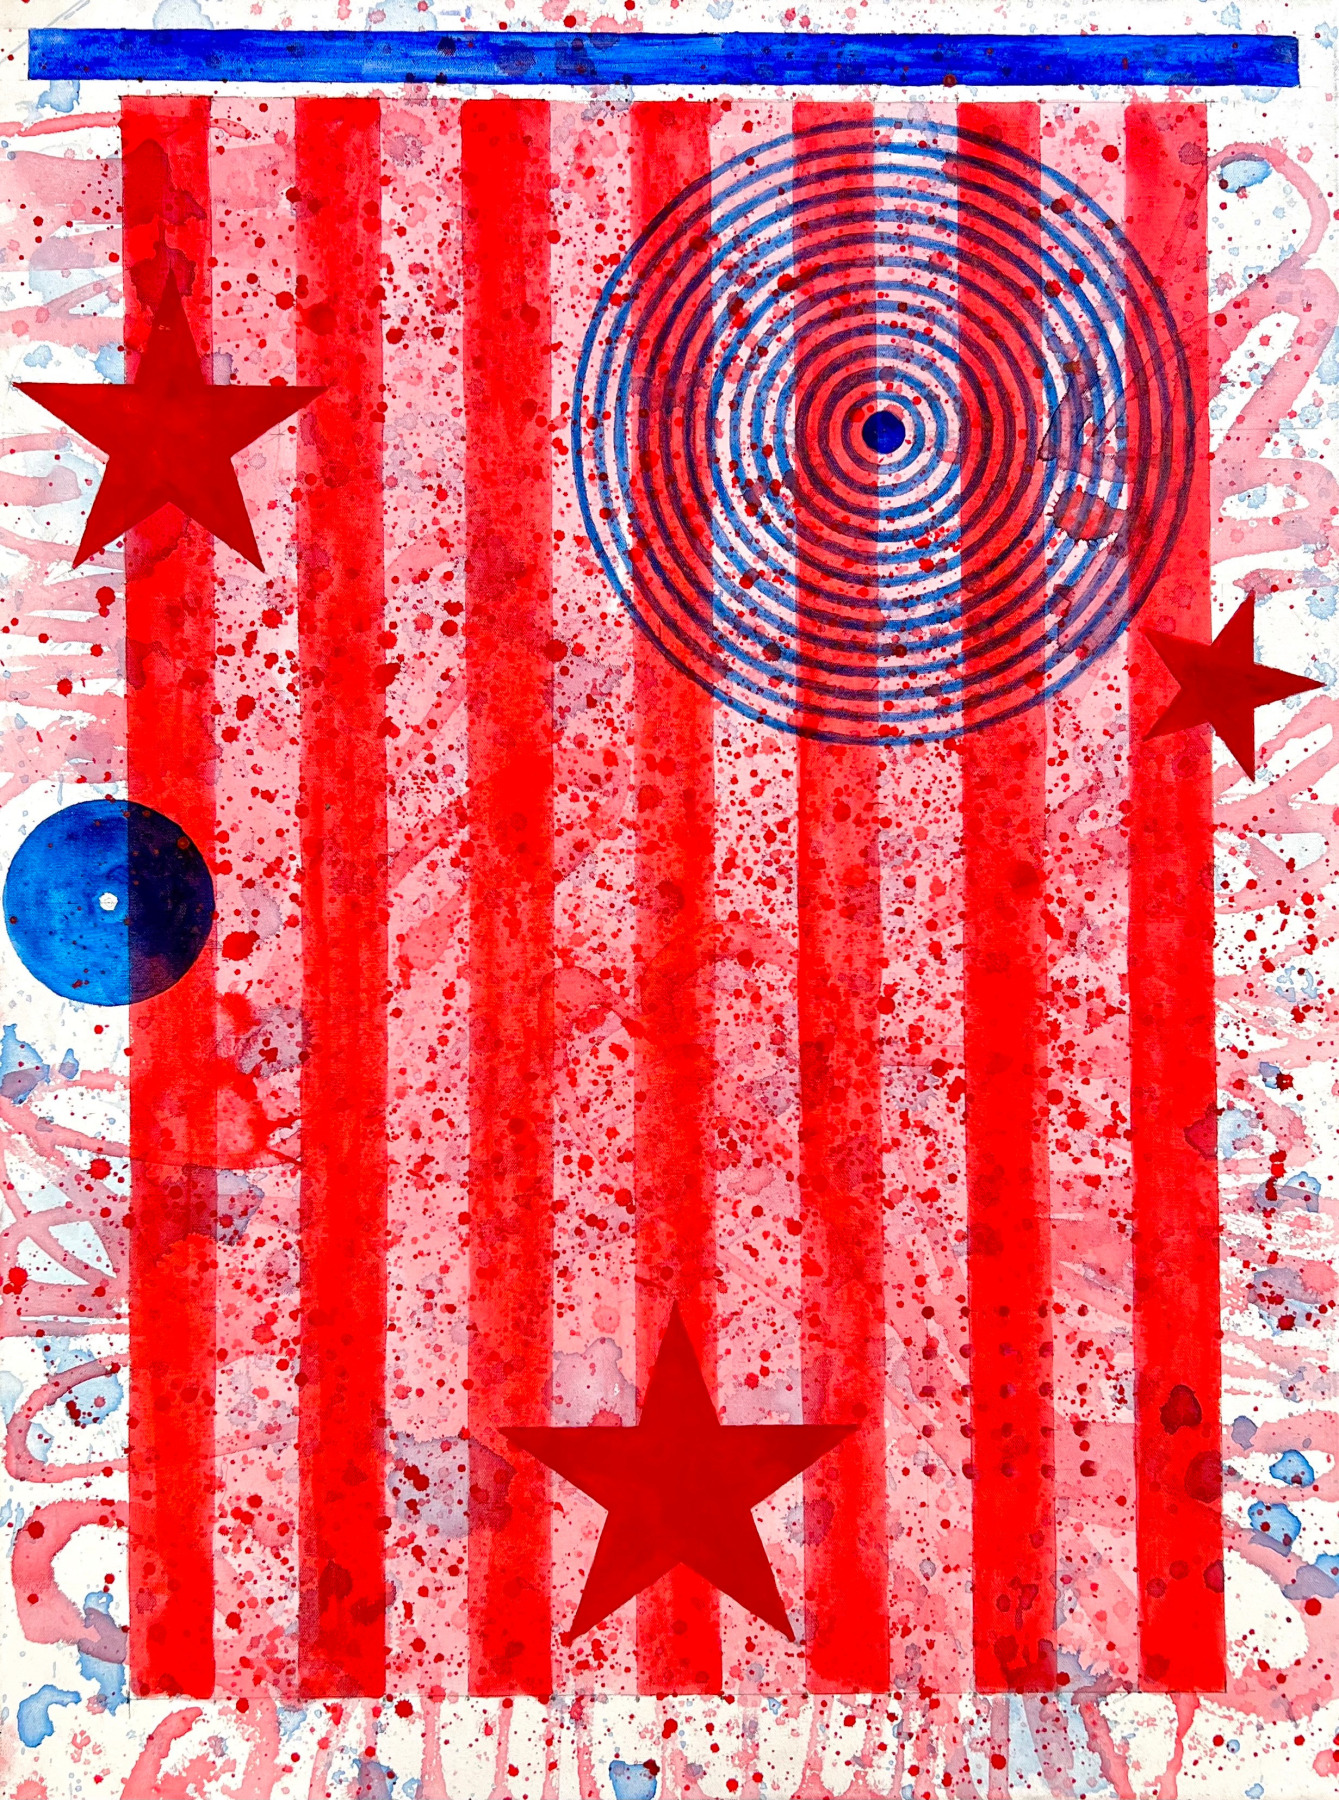 J. Steven Manolis (1948),&amp;nbsp;The Steady State American Flag, 2023

Acrylic on canvas, 40 x 30 inches